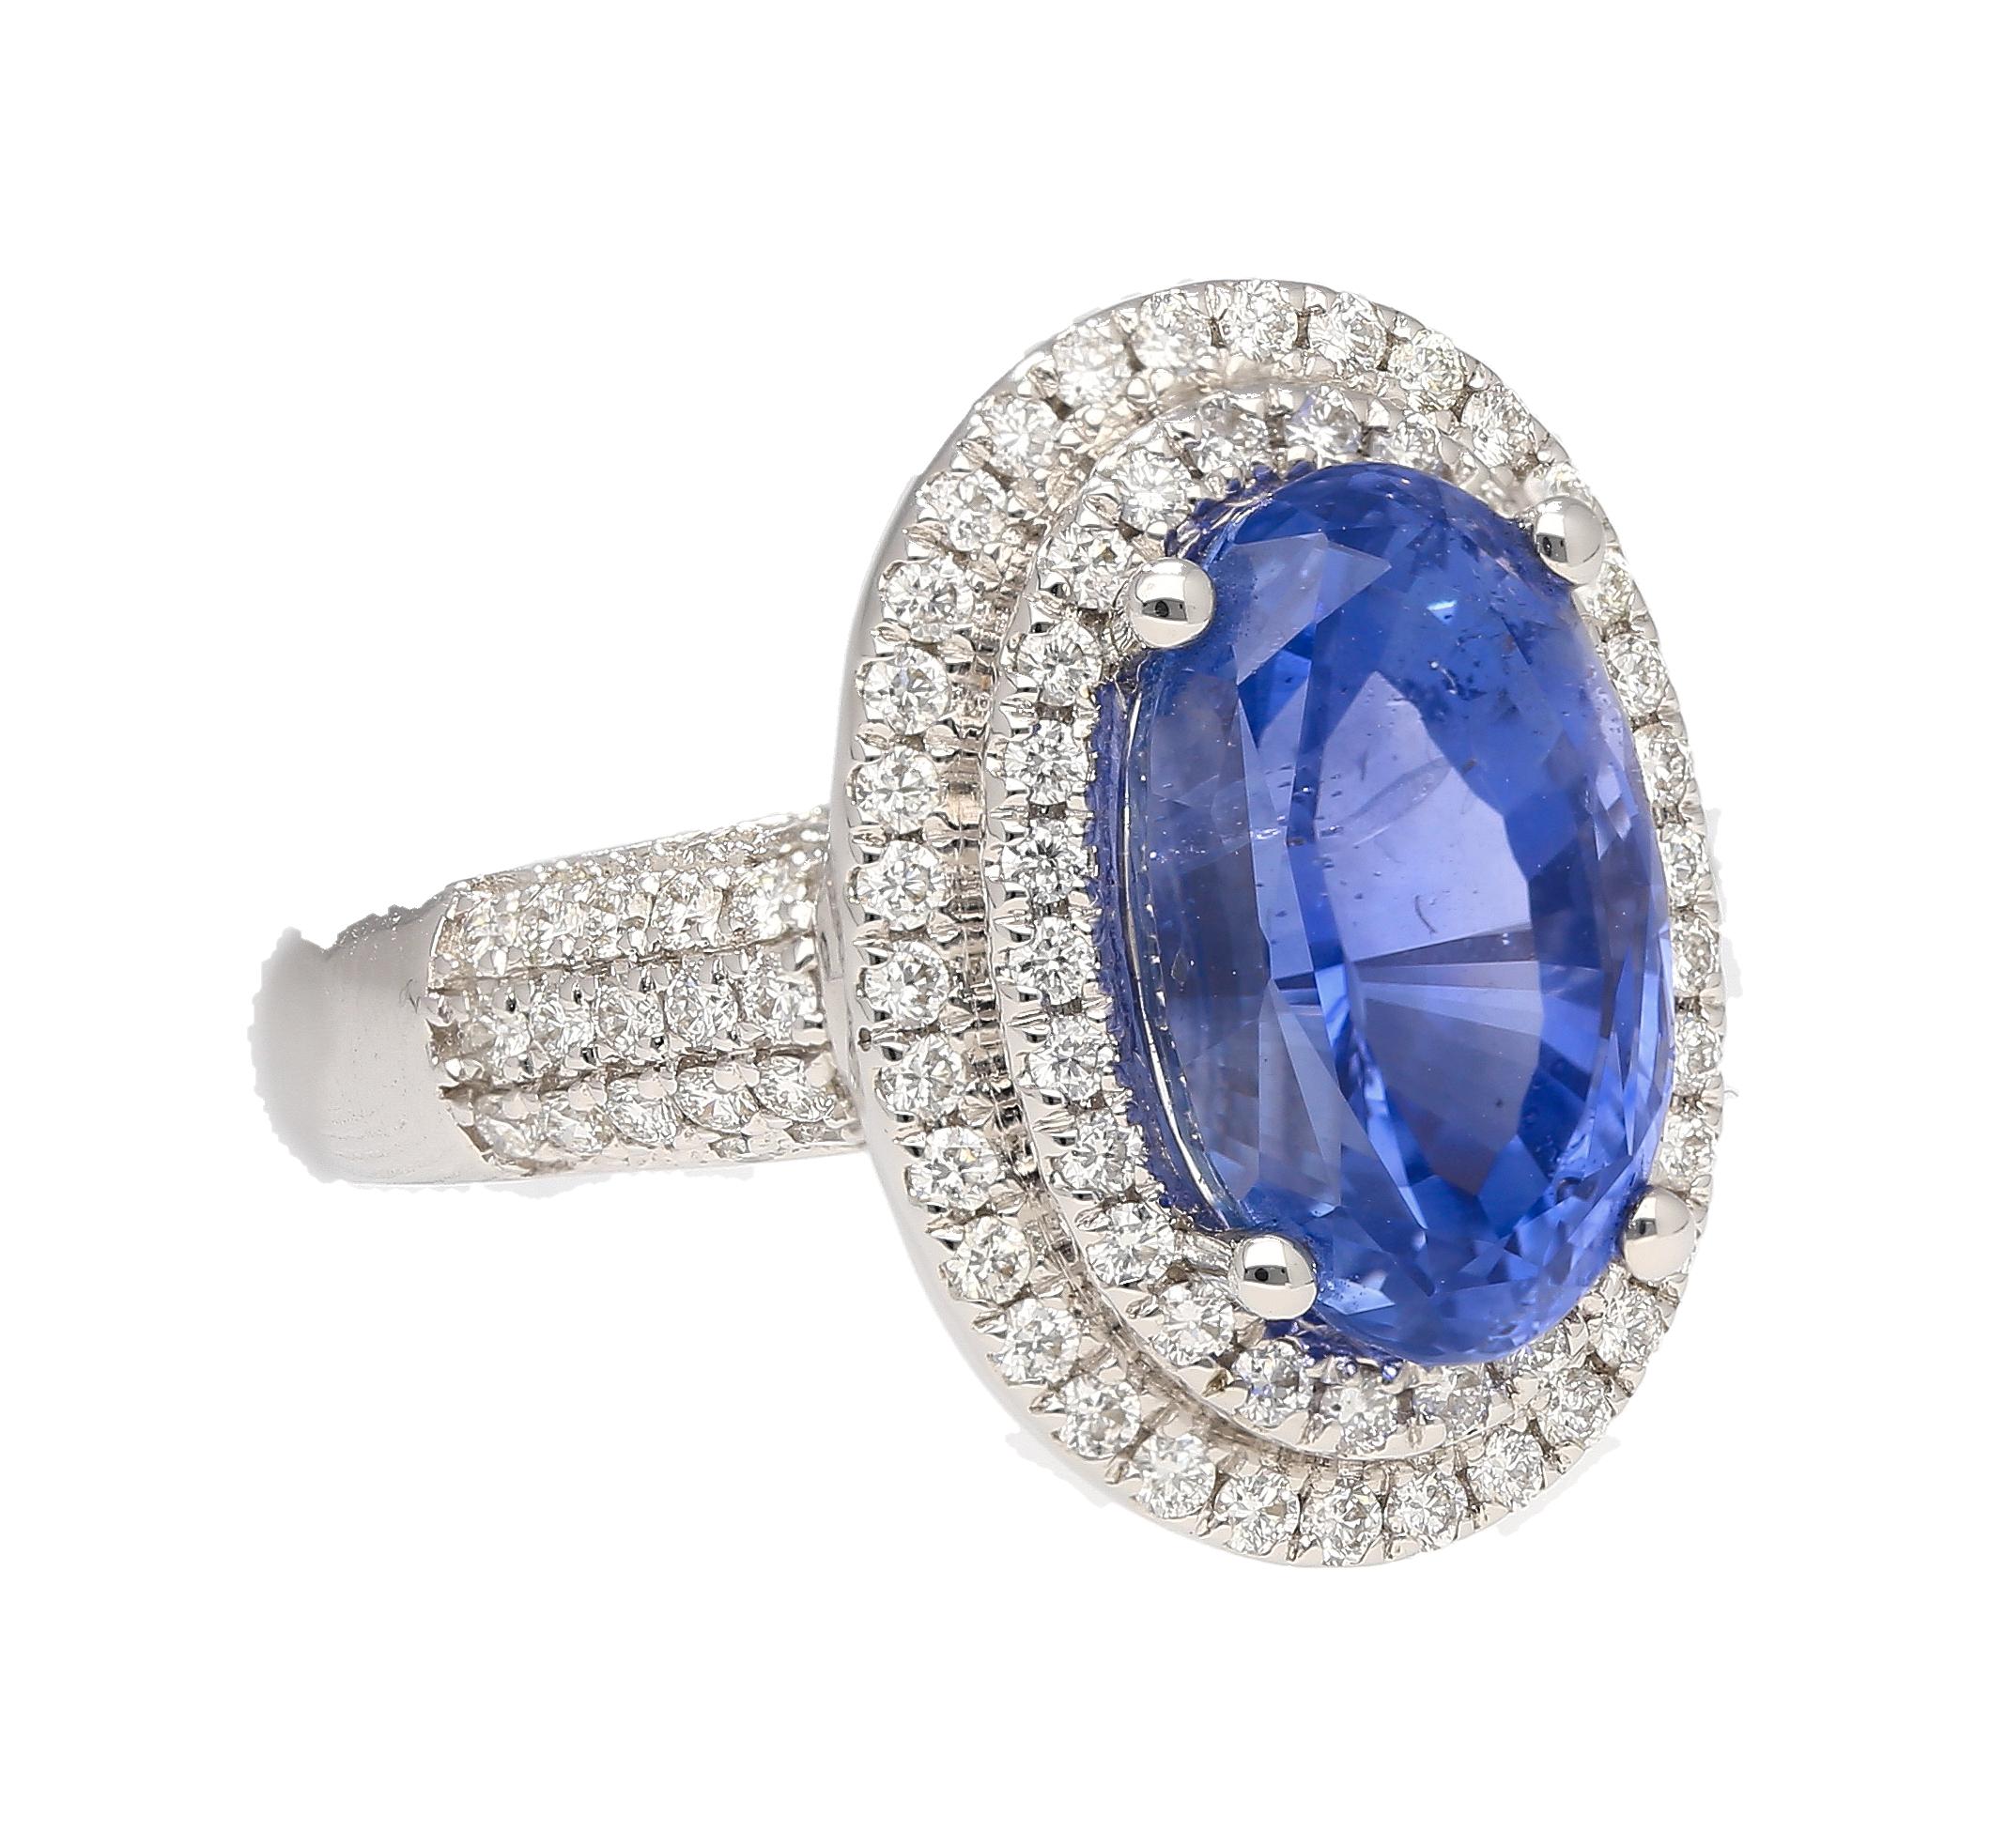 18k white gold natural blue sapphire and diamond halo ring. Featuring a center stone of immaculate color and quality. Sri Lanka origin, richly dense in color hue, and no heat treatment of any kind. This sapphire bears the ideal measurements that